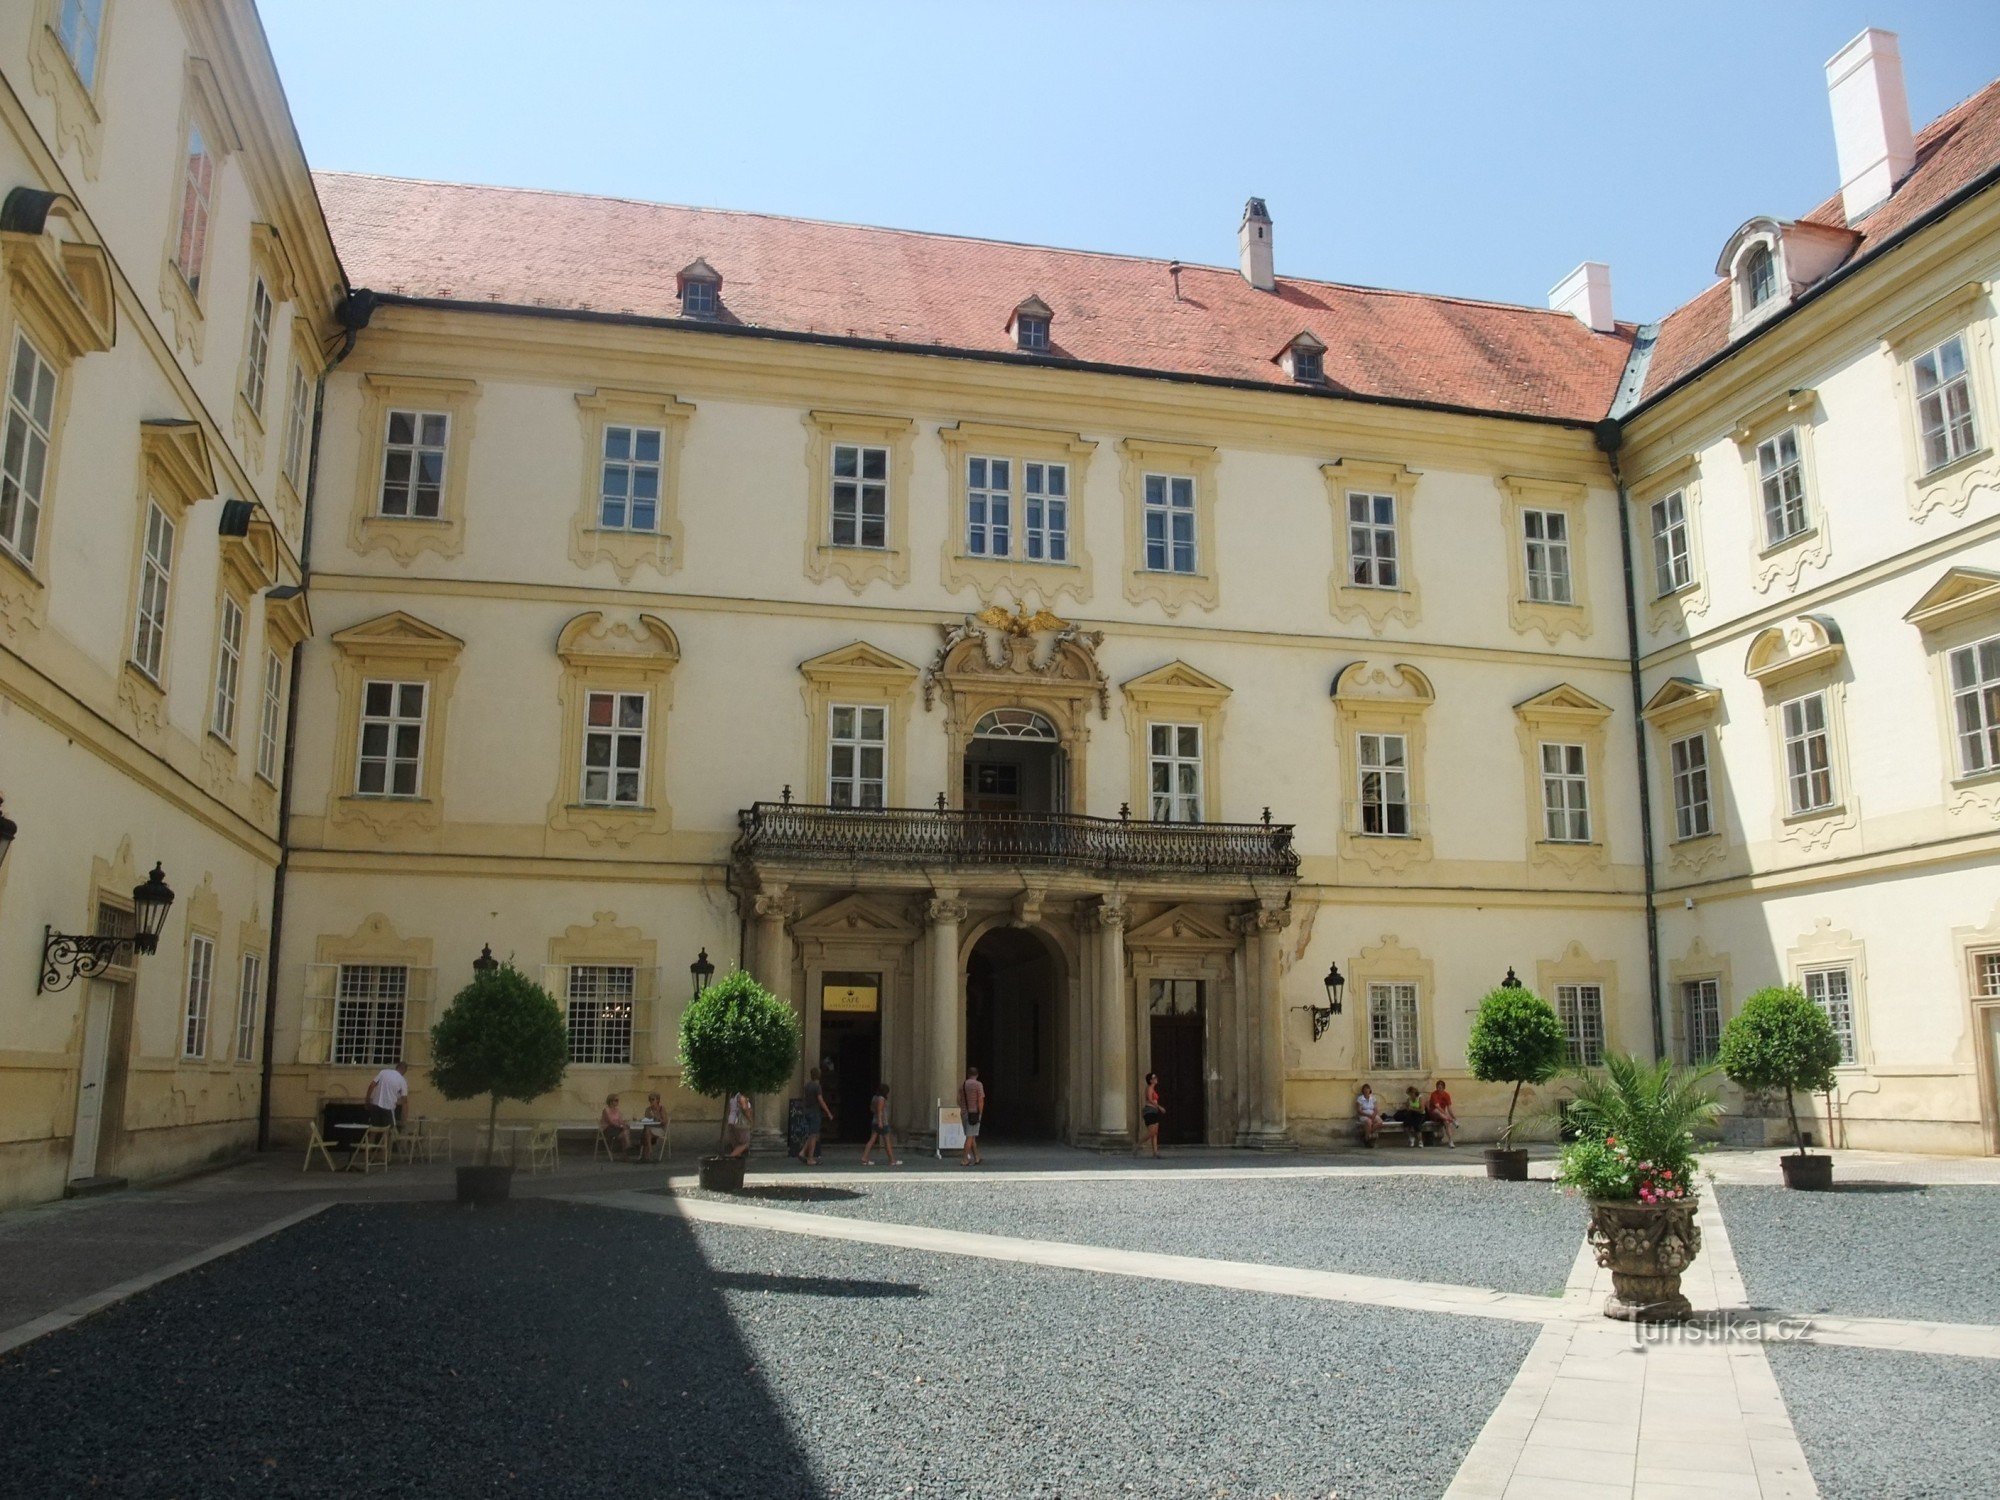 Valtice Castle - the former stately residence of the Liechtensteins